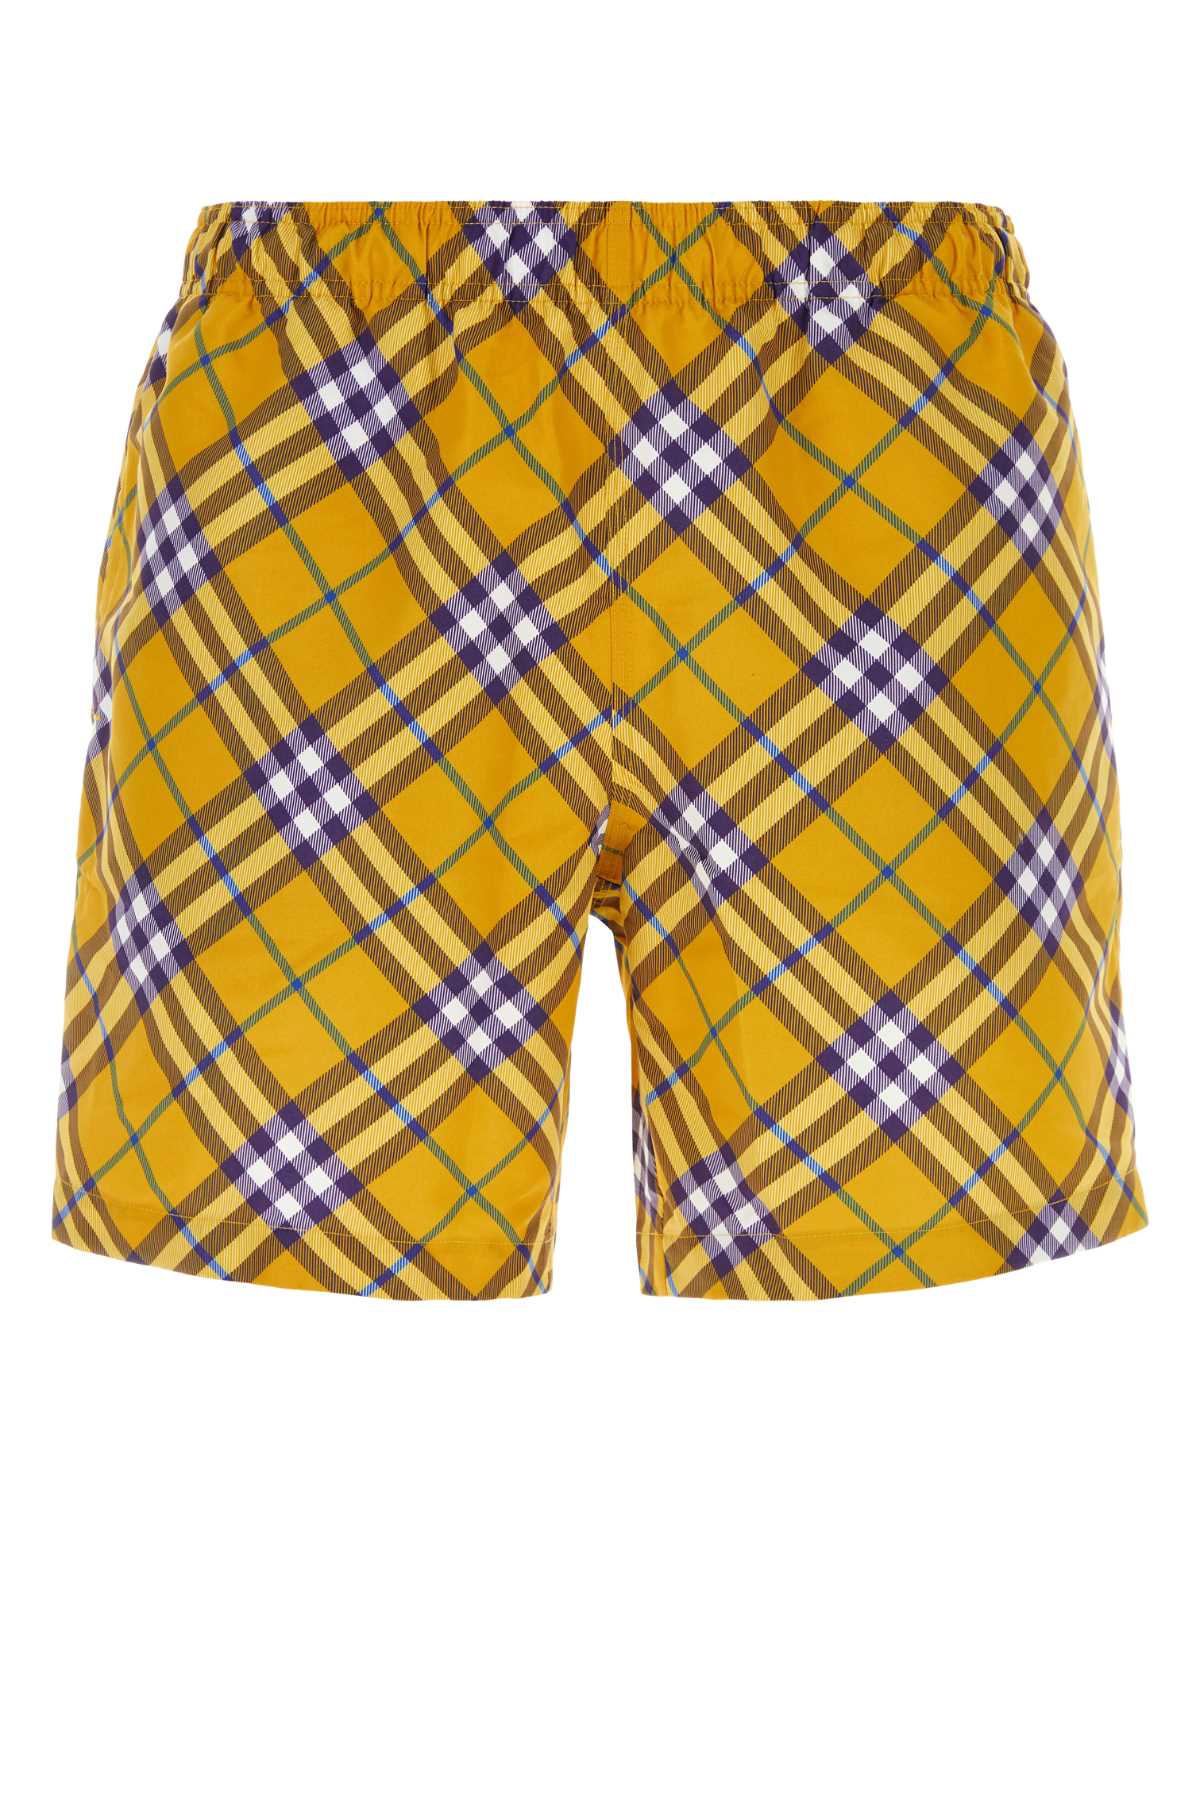 Burberry Printed Polyester Swimming Shorts